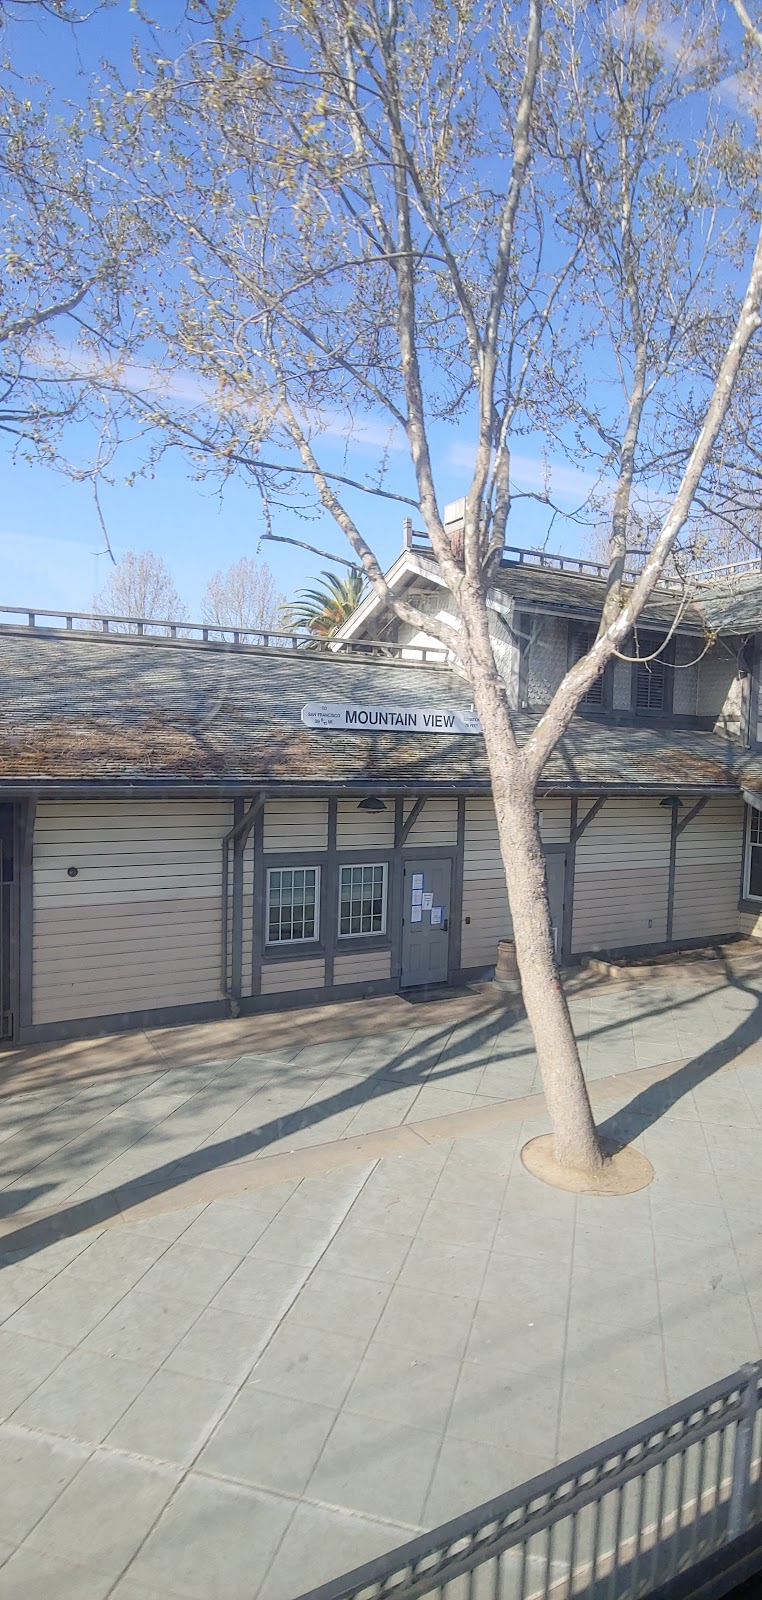 Mountain View Station | 650 W Evelyn Ave, Mountain View, CA 94041 | Phone: (800) 660-4287